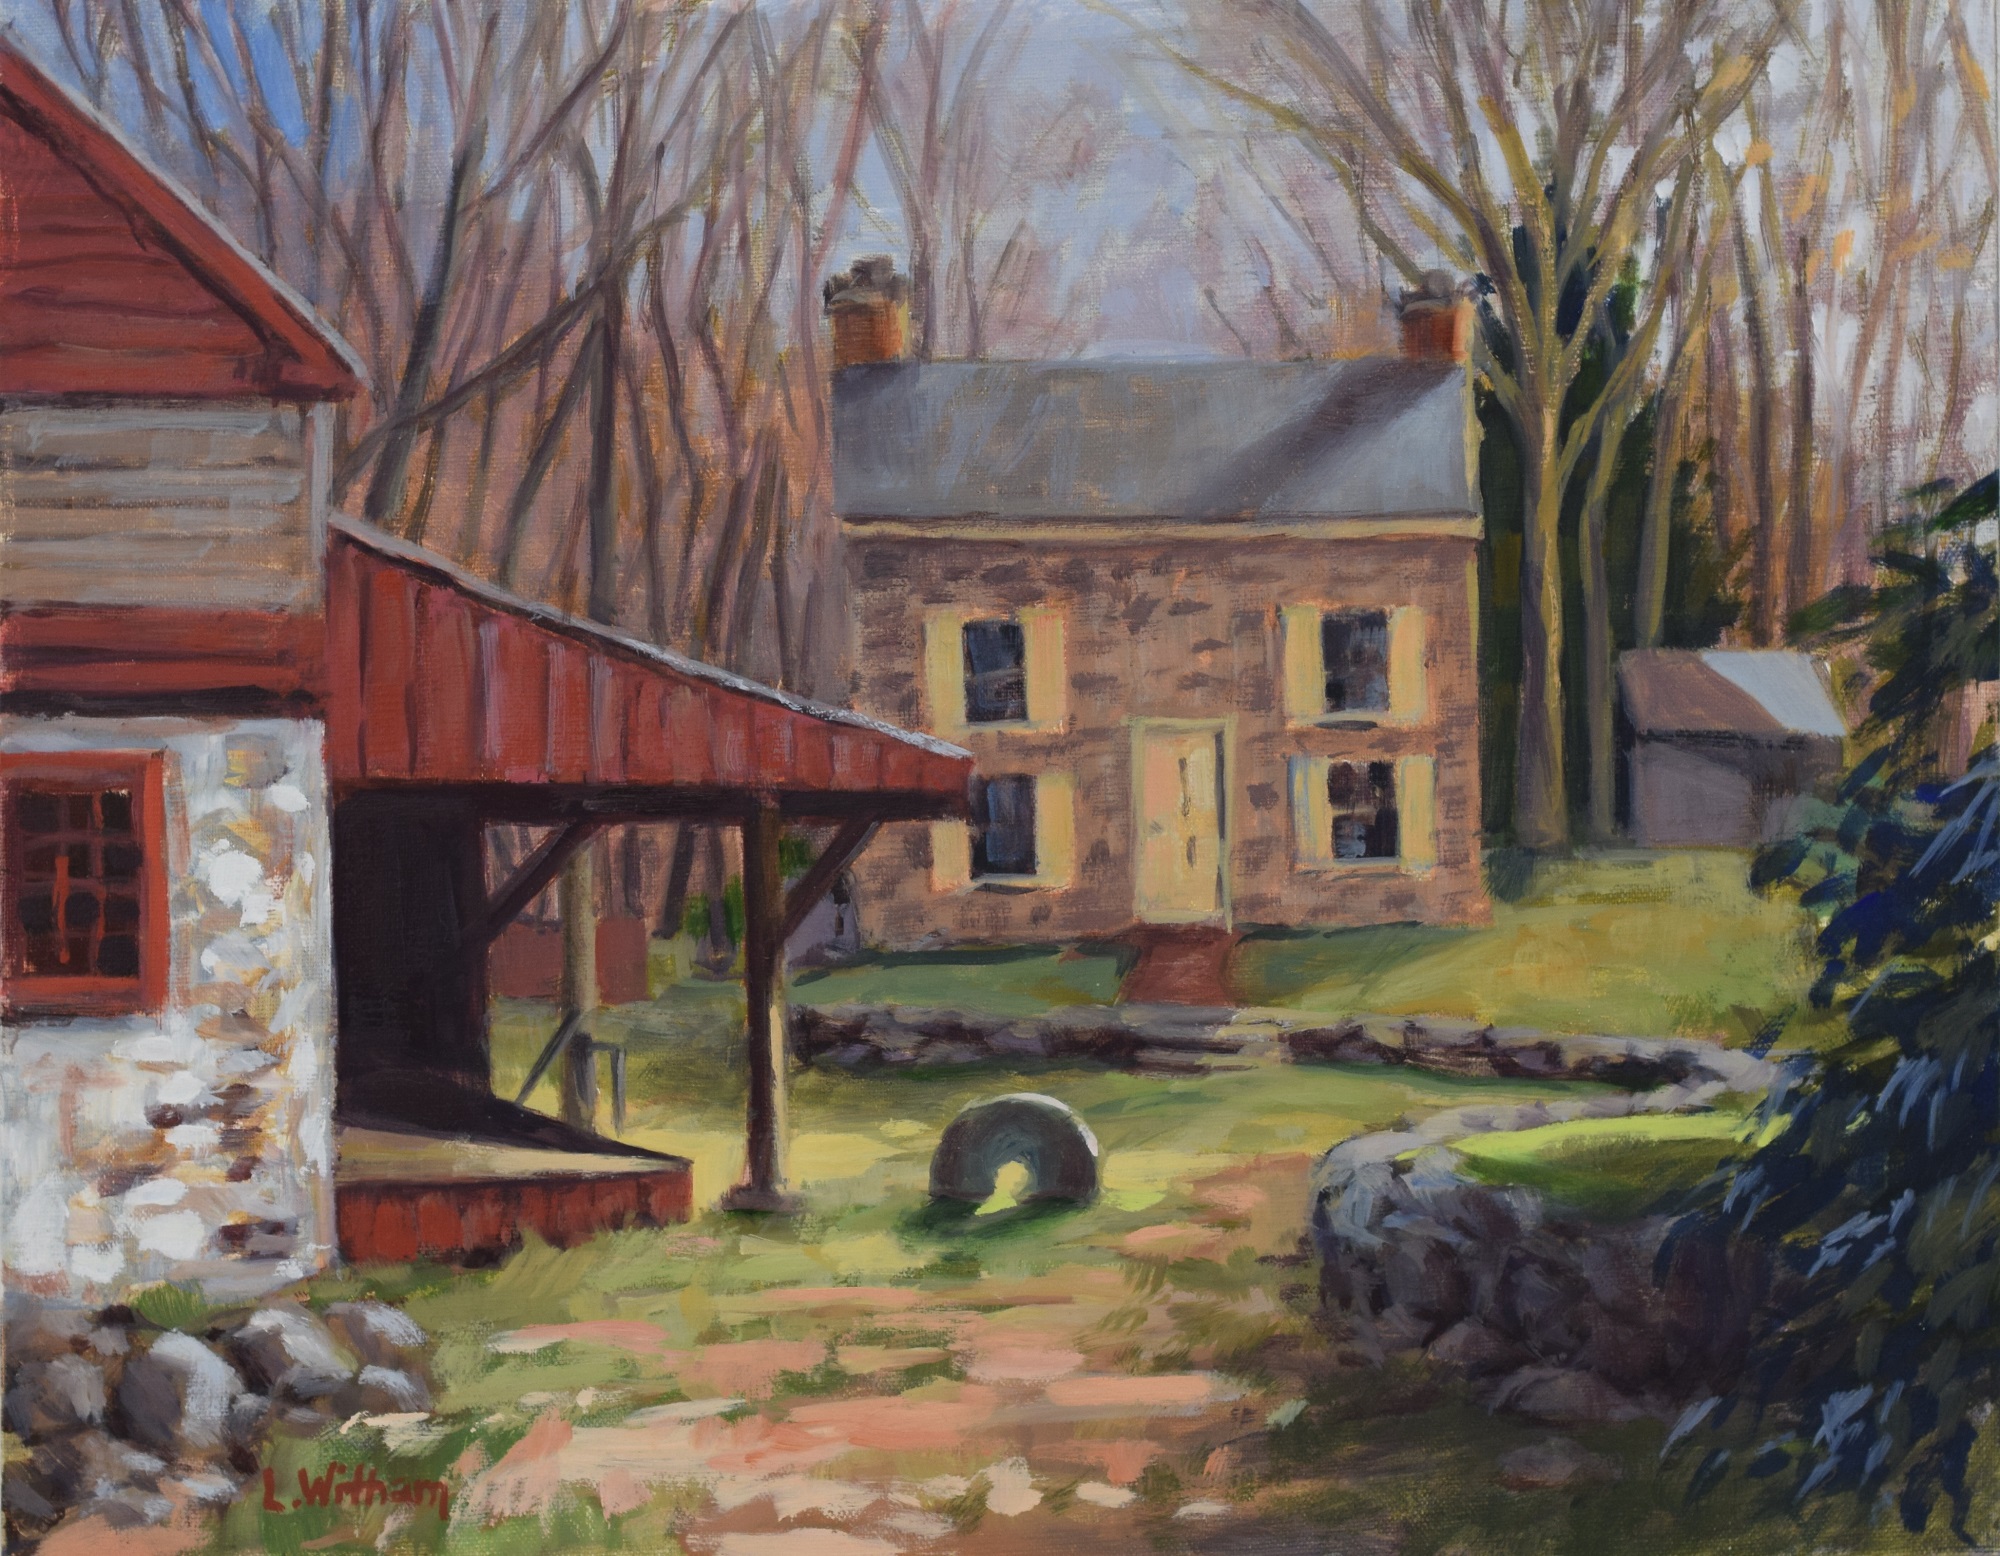 The Gristmill, Oil on linen, 11x14